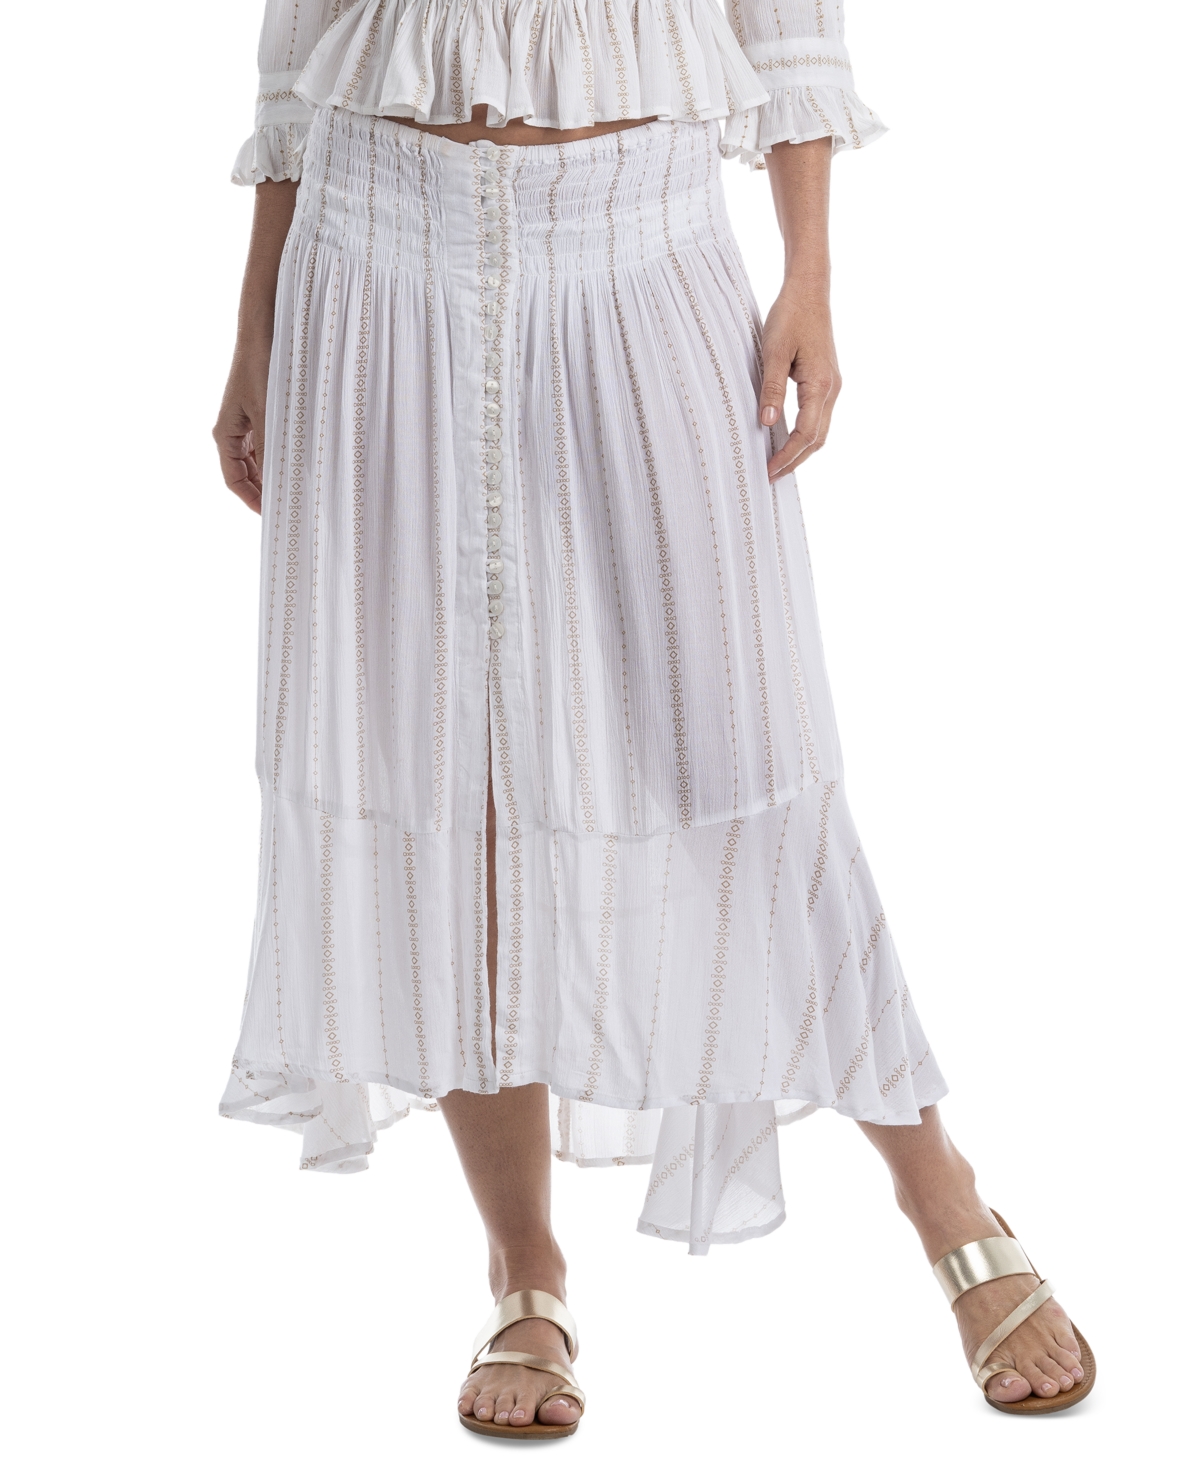 Women's Button-Front Cotton Skirt Swim Cover-Up - White